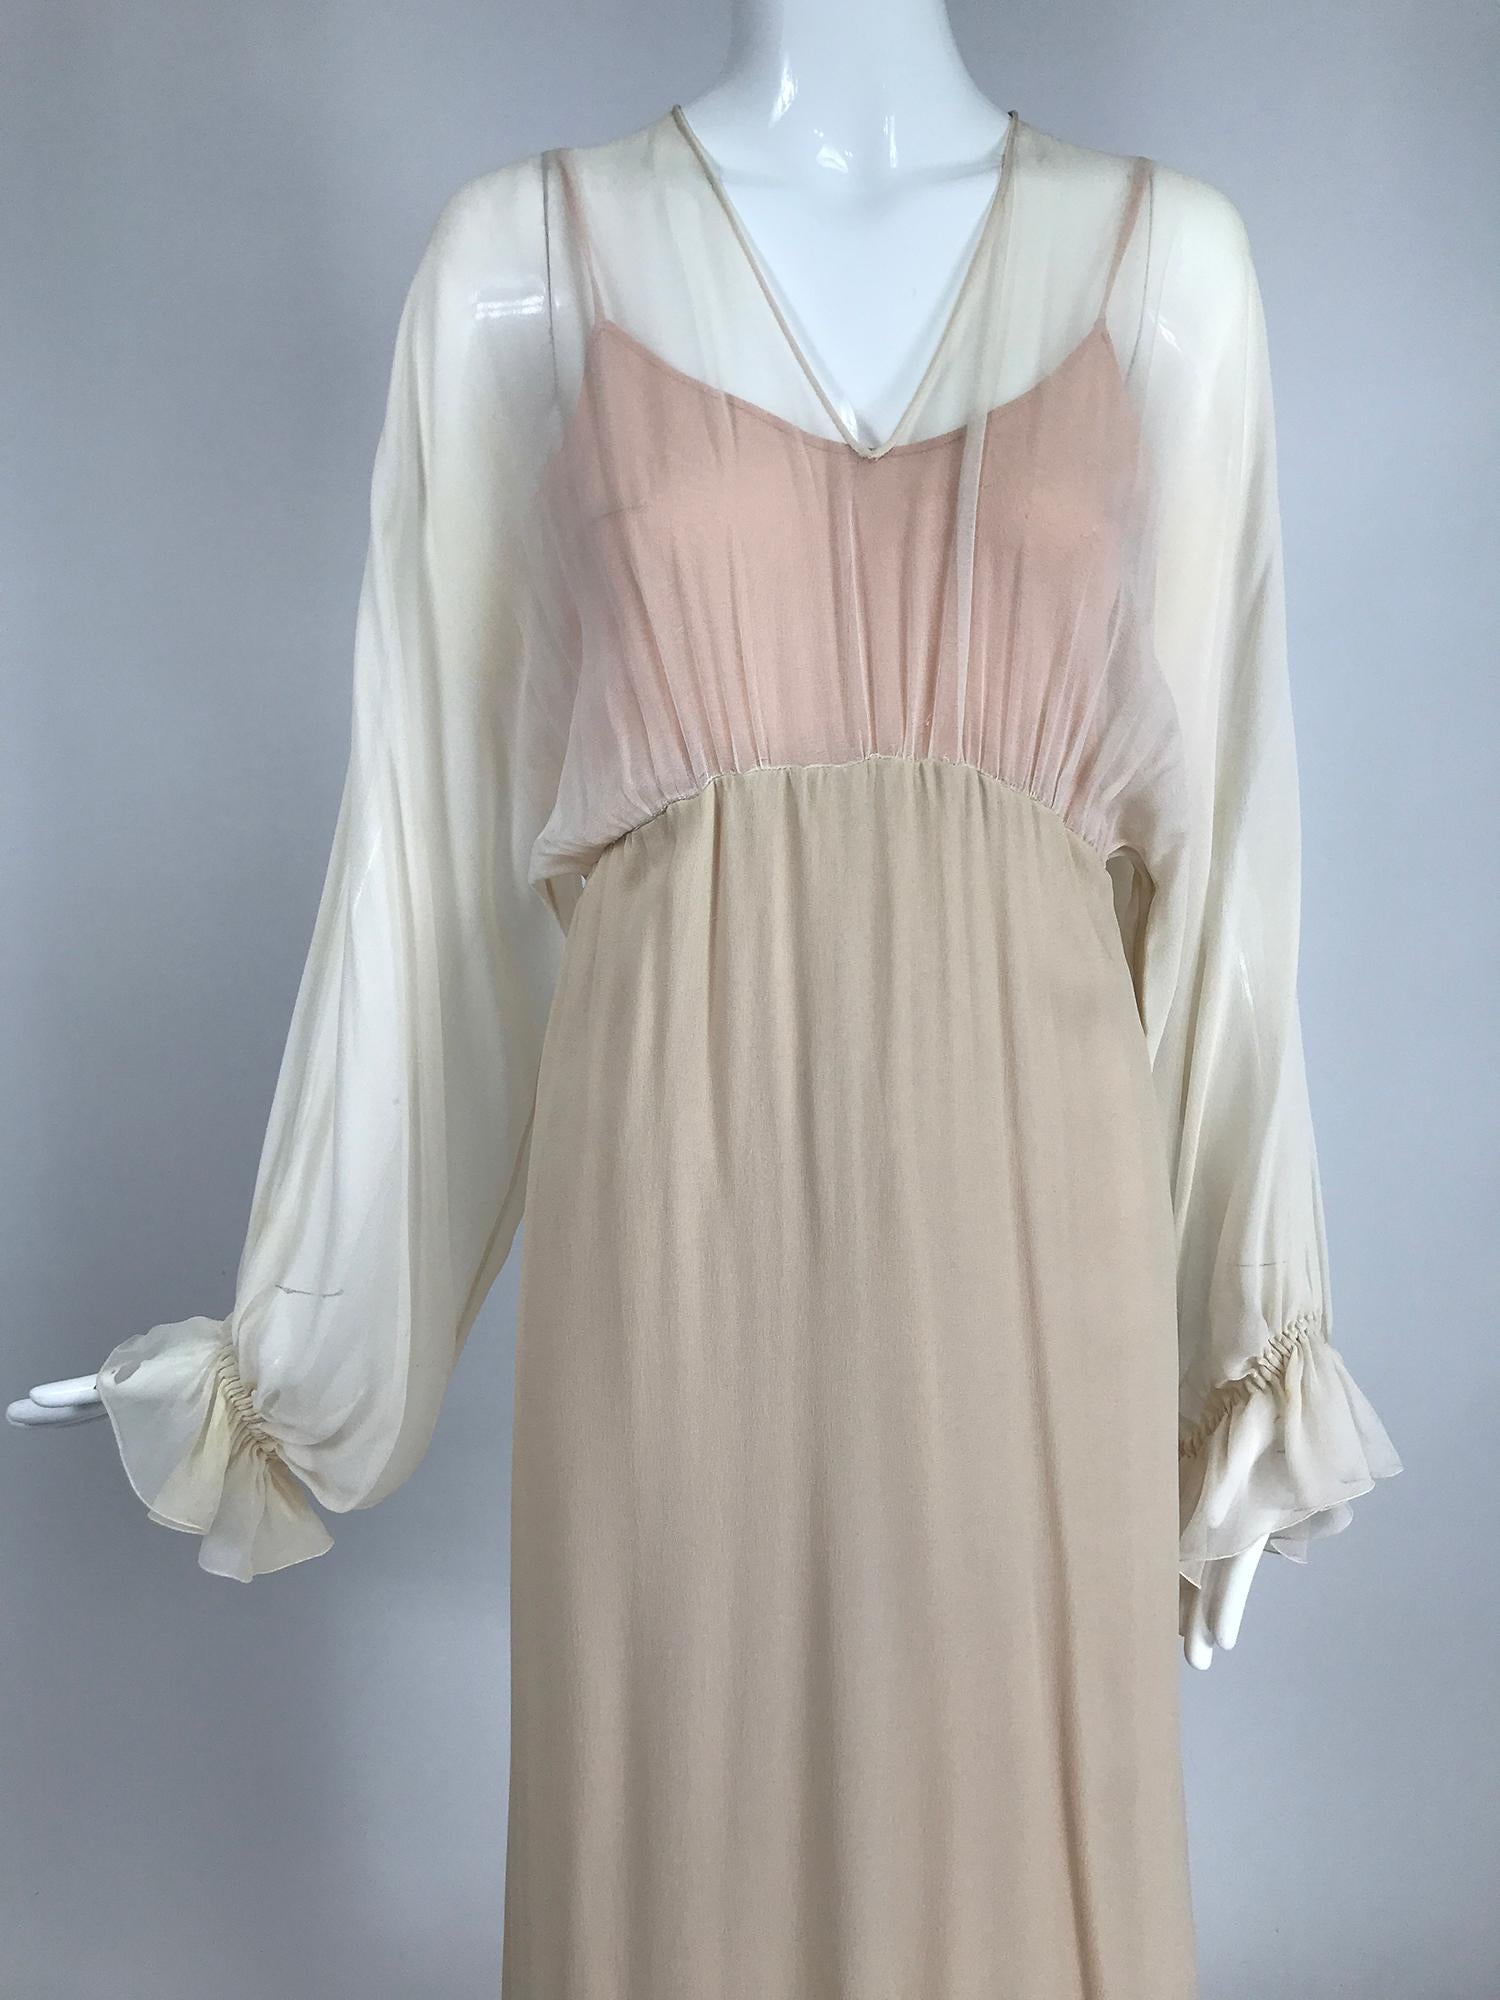     Tonal layered silk chiffon, bat wing, poet sleeve, maxi dress from the 1970s. This beautiful dress is done in tone on tone peachy/nude chiffon. The dress bodice has a V neckline and draped bat wing sleeves that are gathered into cased elastic